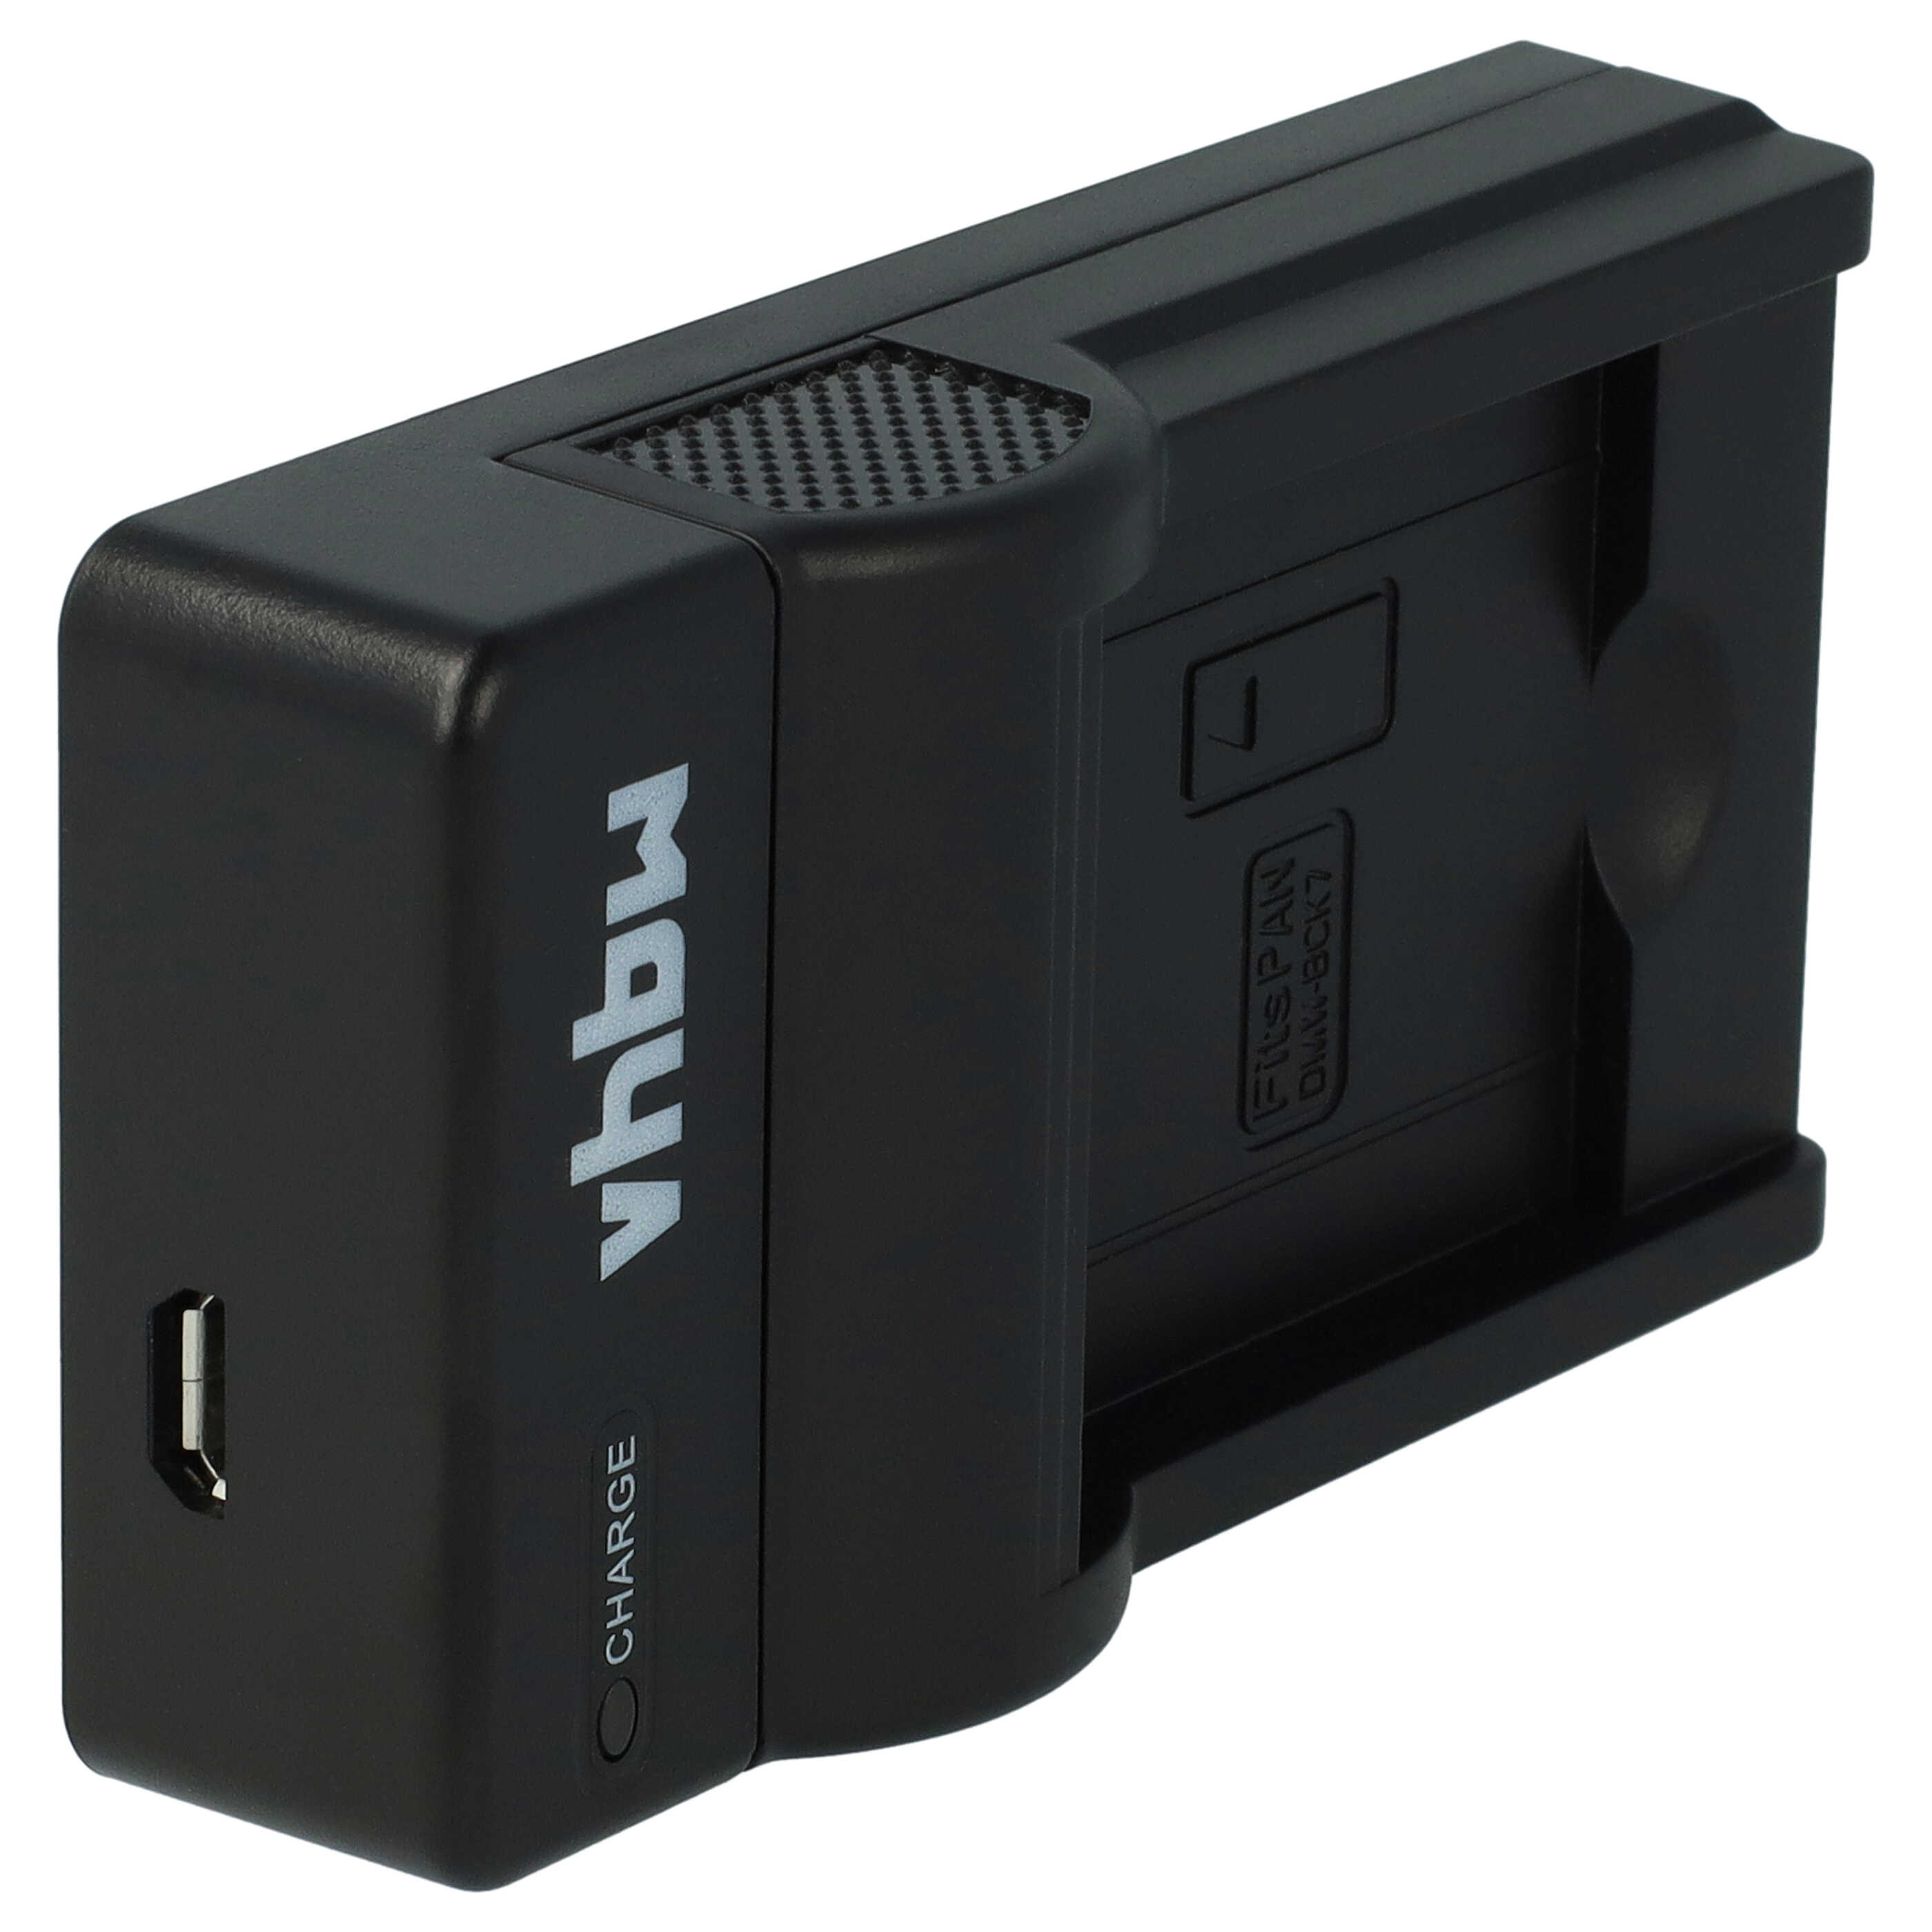 Battery Charger suitable for Lumix DMC-FH2 Camera etc. - 0.5 A, 4.2 V